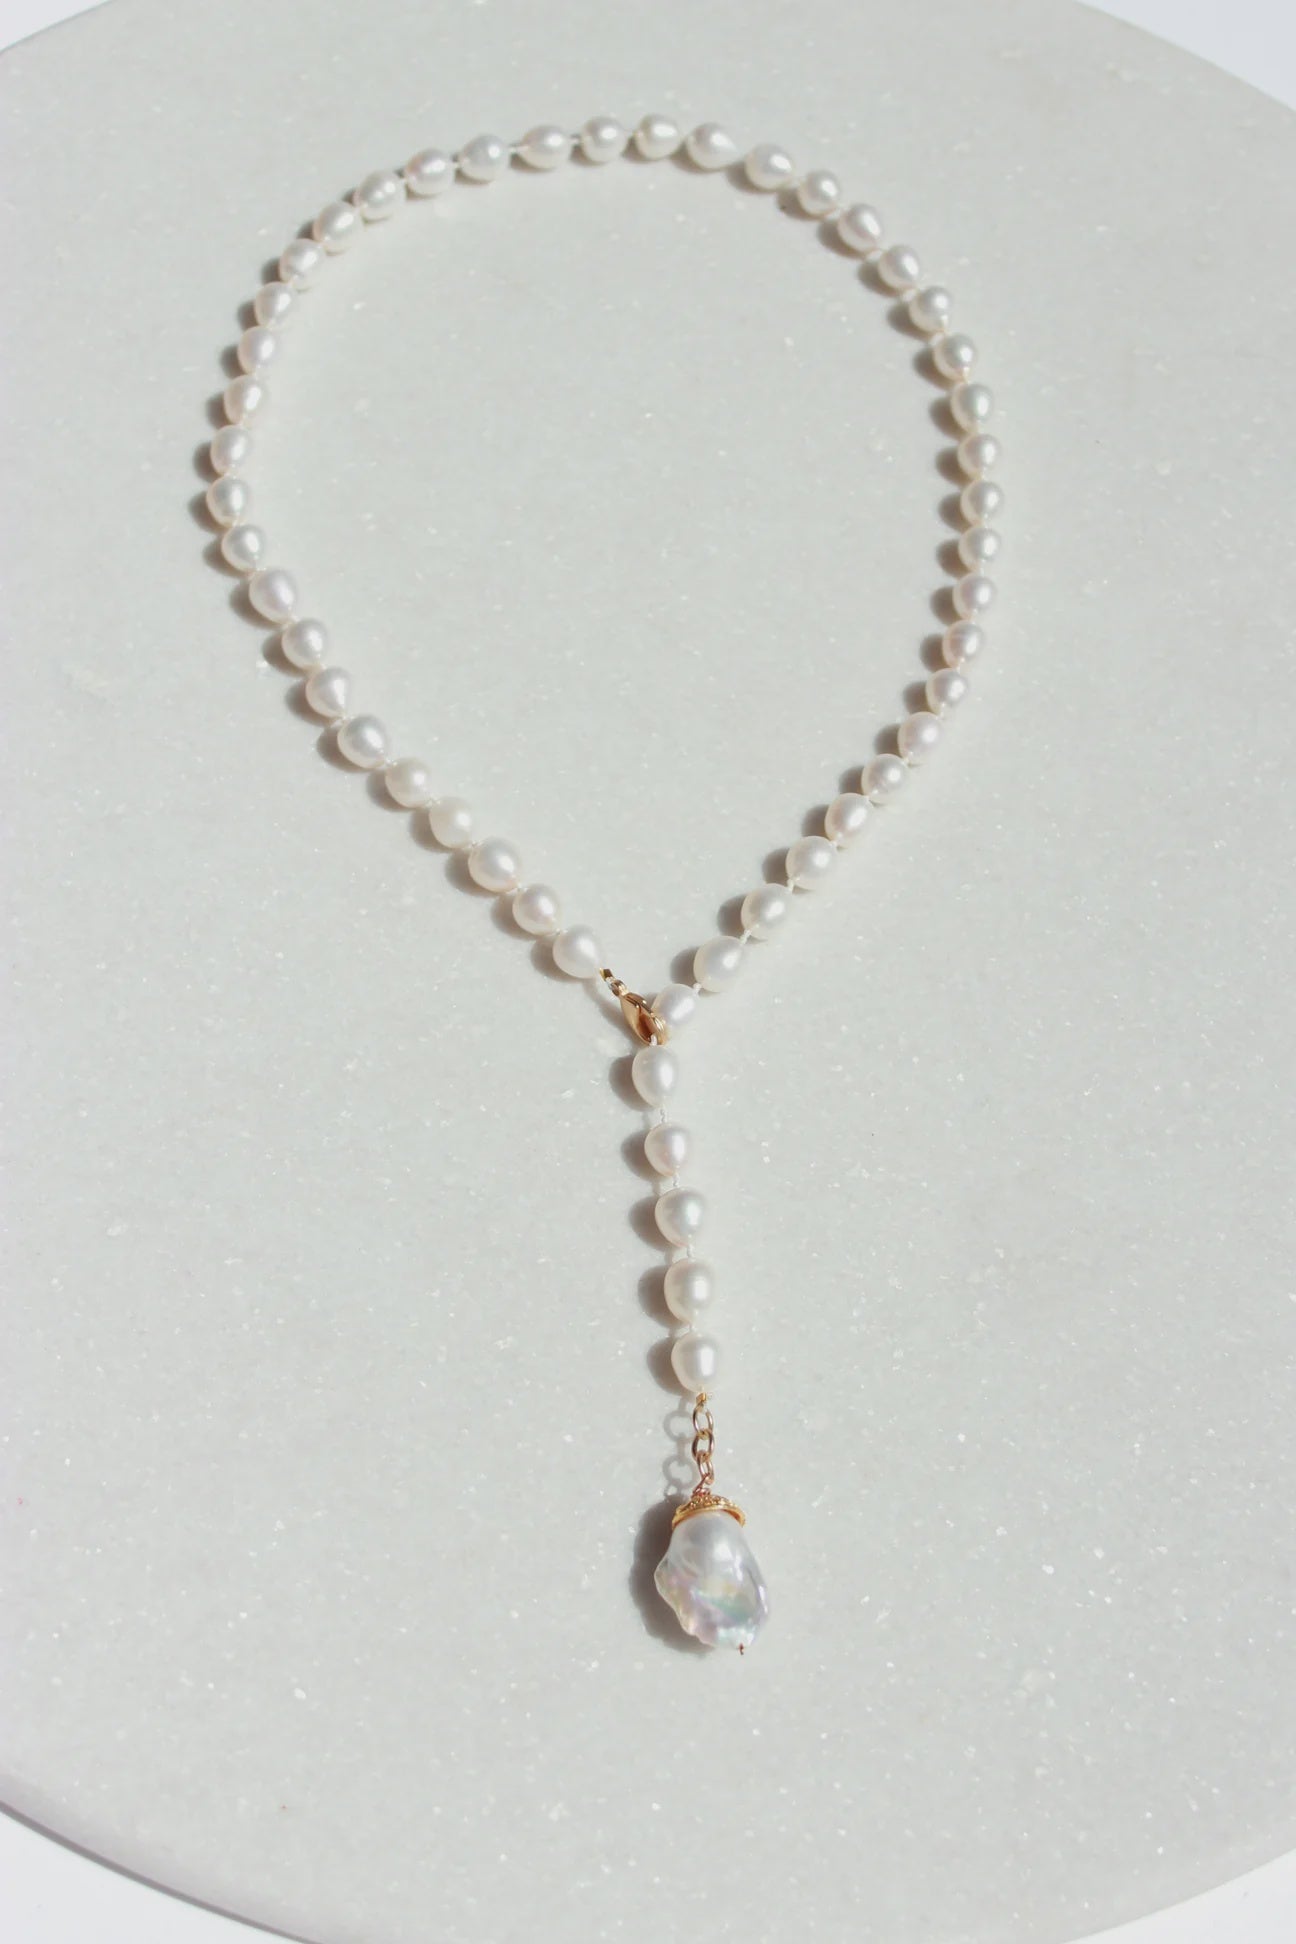 A hand-crafted Classic Pearl Necklace from Bittersweet Designs with a pendant displayed against a light gray background, arranged in a teardrop shape. The pendant features a larger, iridescent pearl dangling from the center.